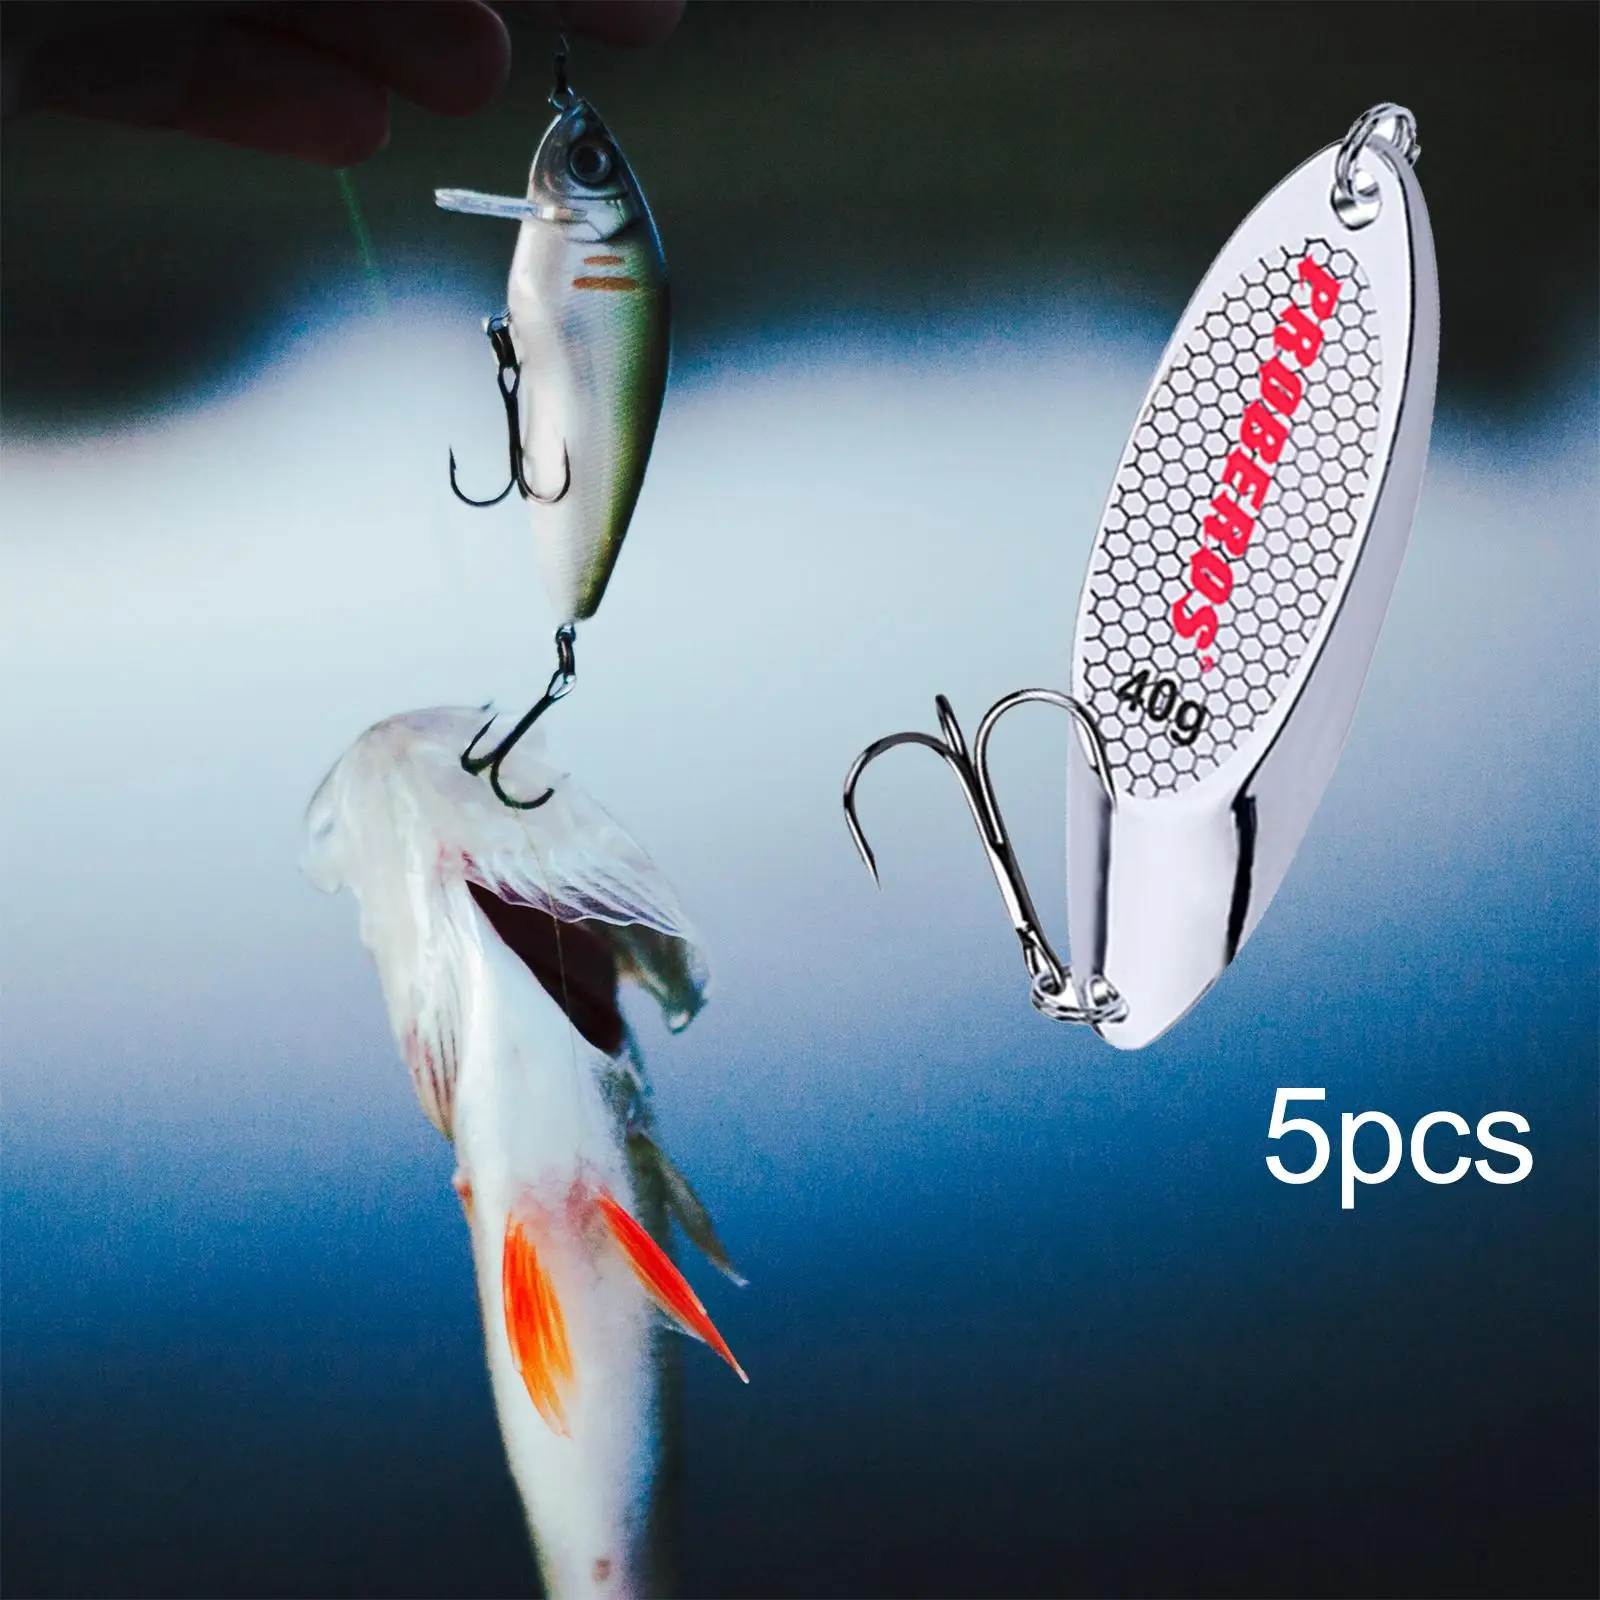 5 Pieces Fishing Spoons Lures for Huge Distance Cast Freshwater Hard Metal Casting Spoons for Bass Pike Trout Catfish Perch